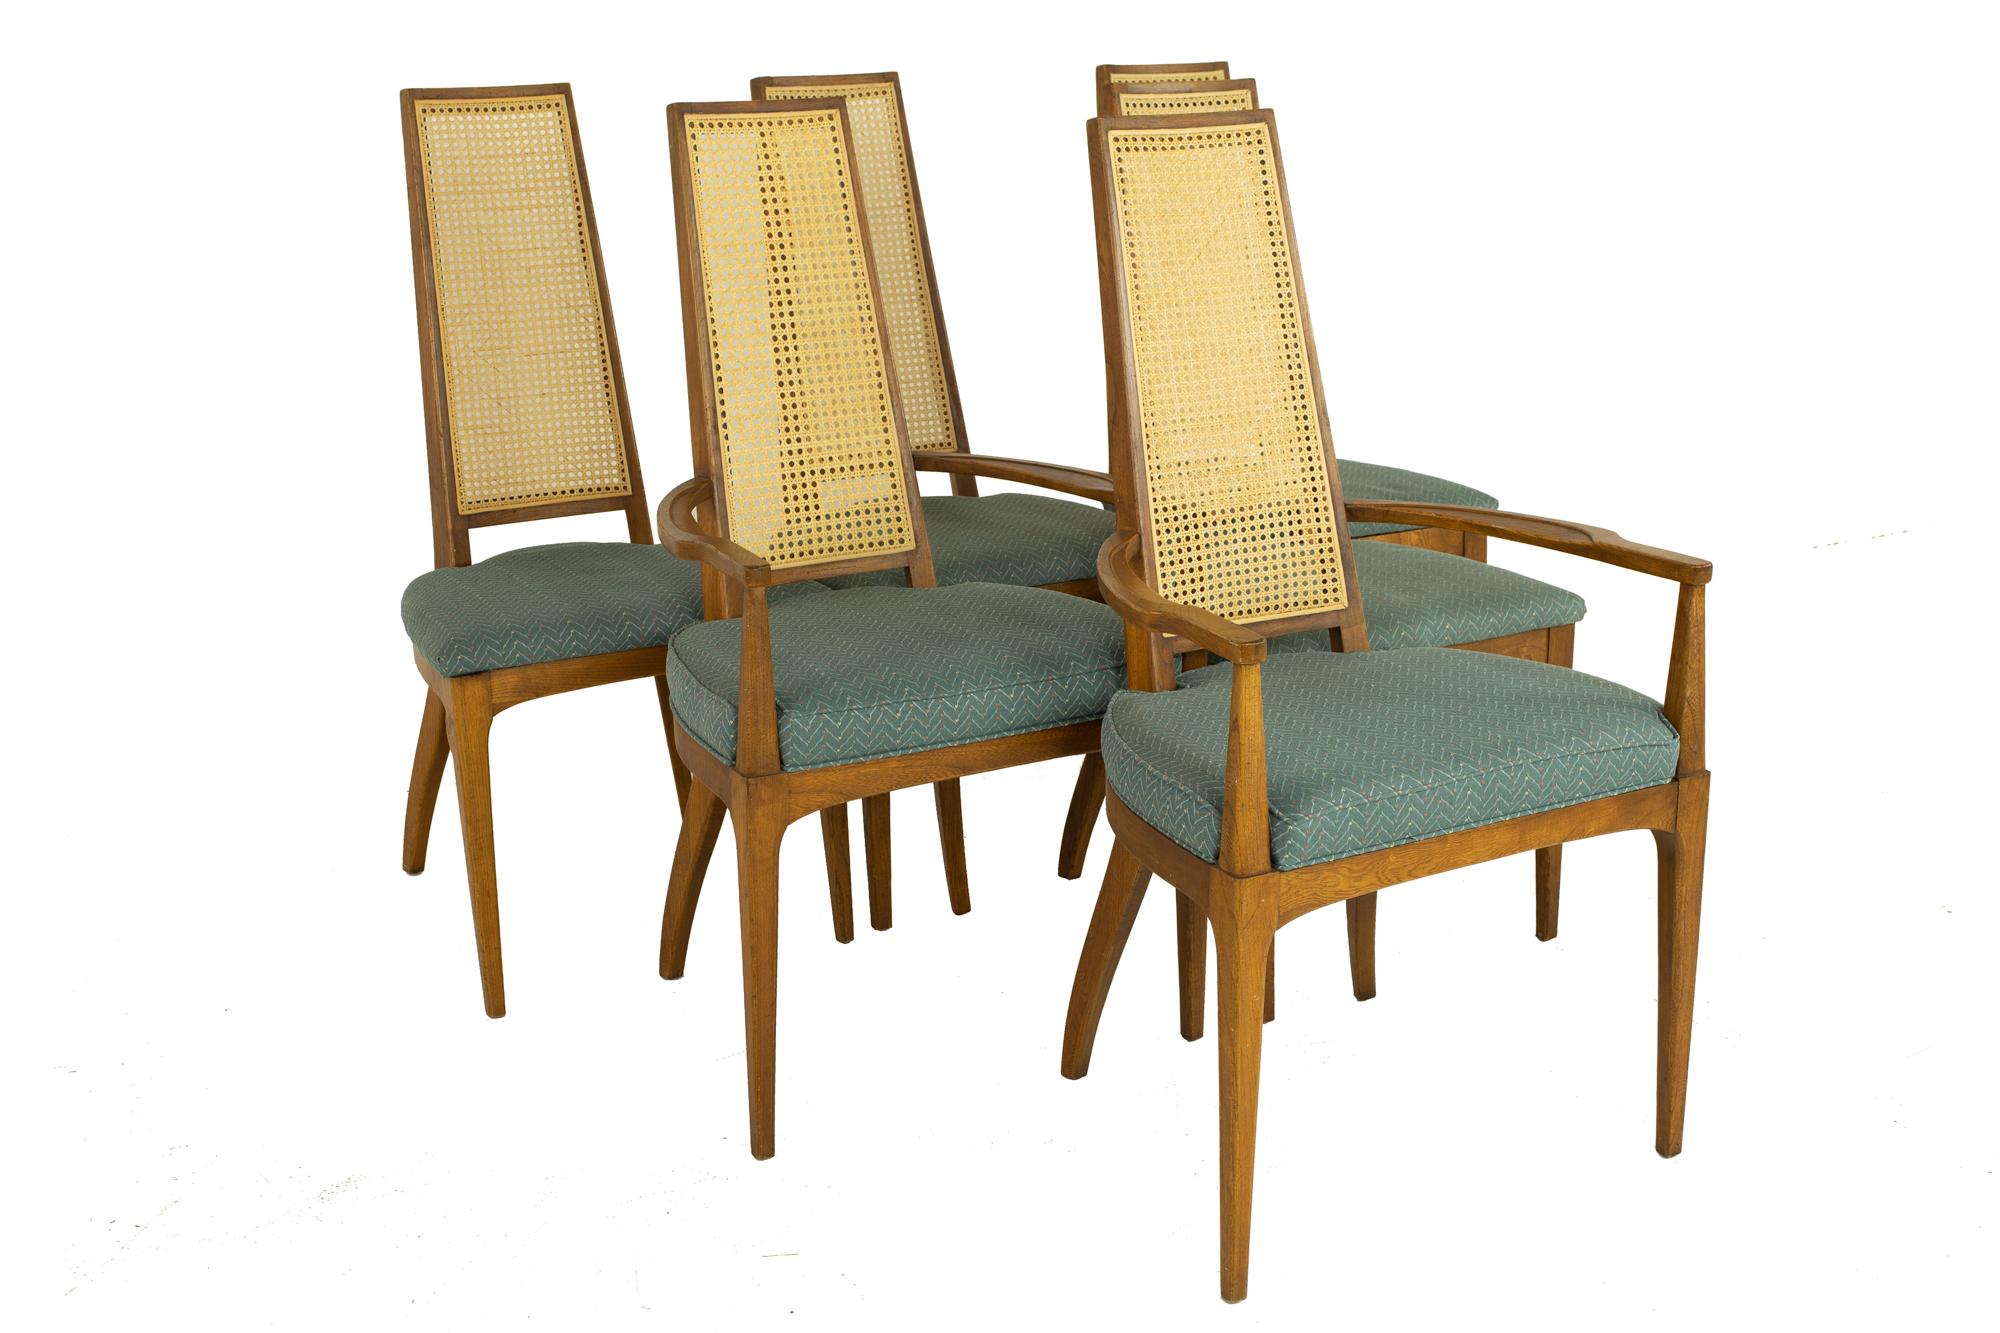 Lane Rhythm style mid century walnut and cane high back dining - chairs set of 6

Each chair measures: 22.25 wide x 23.5 deep x 41 high, with a seat height of 19 inches and arm height/chair clearance of 25 inches 

?All pieces of furniture can